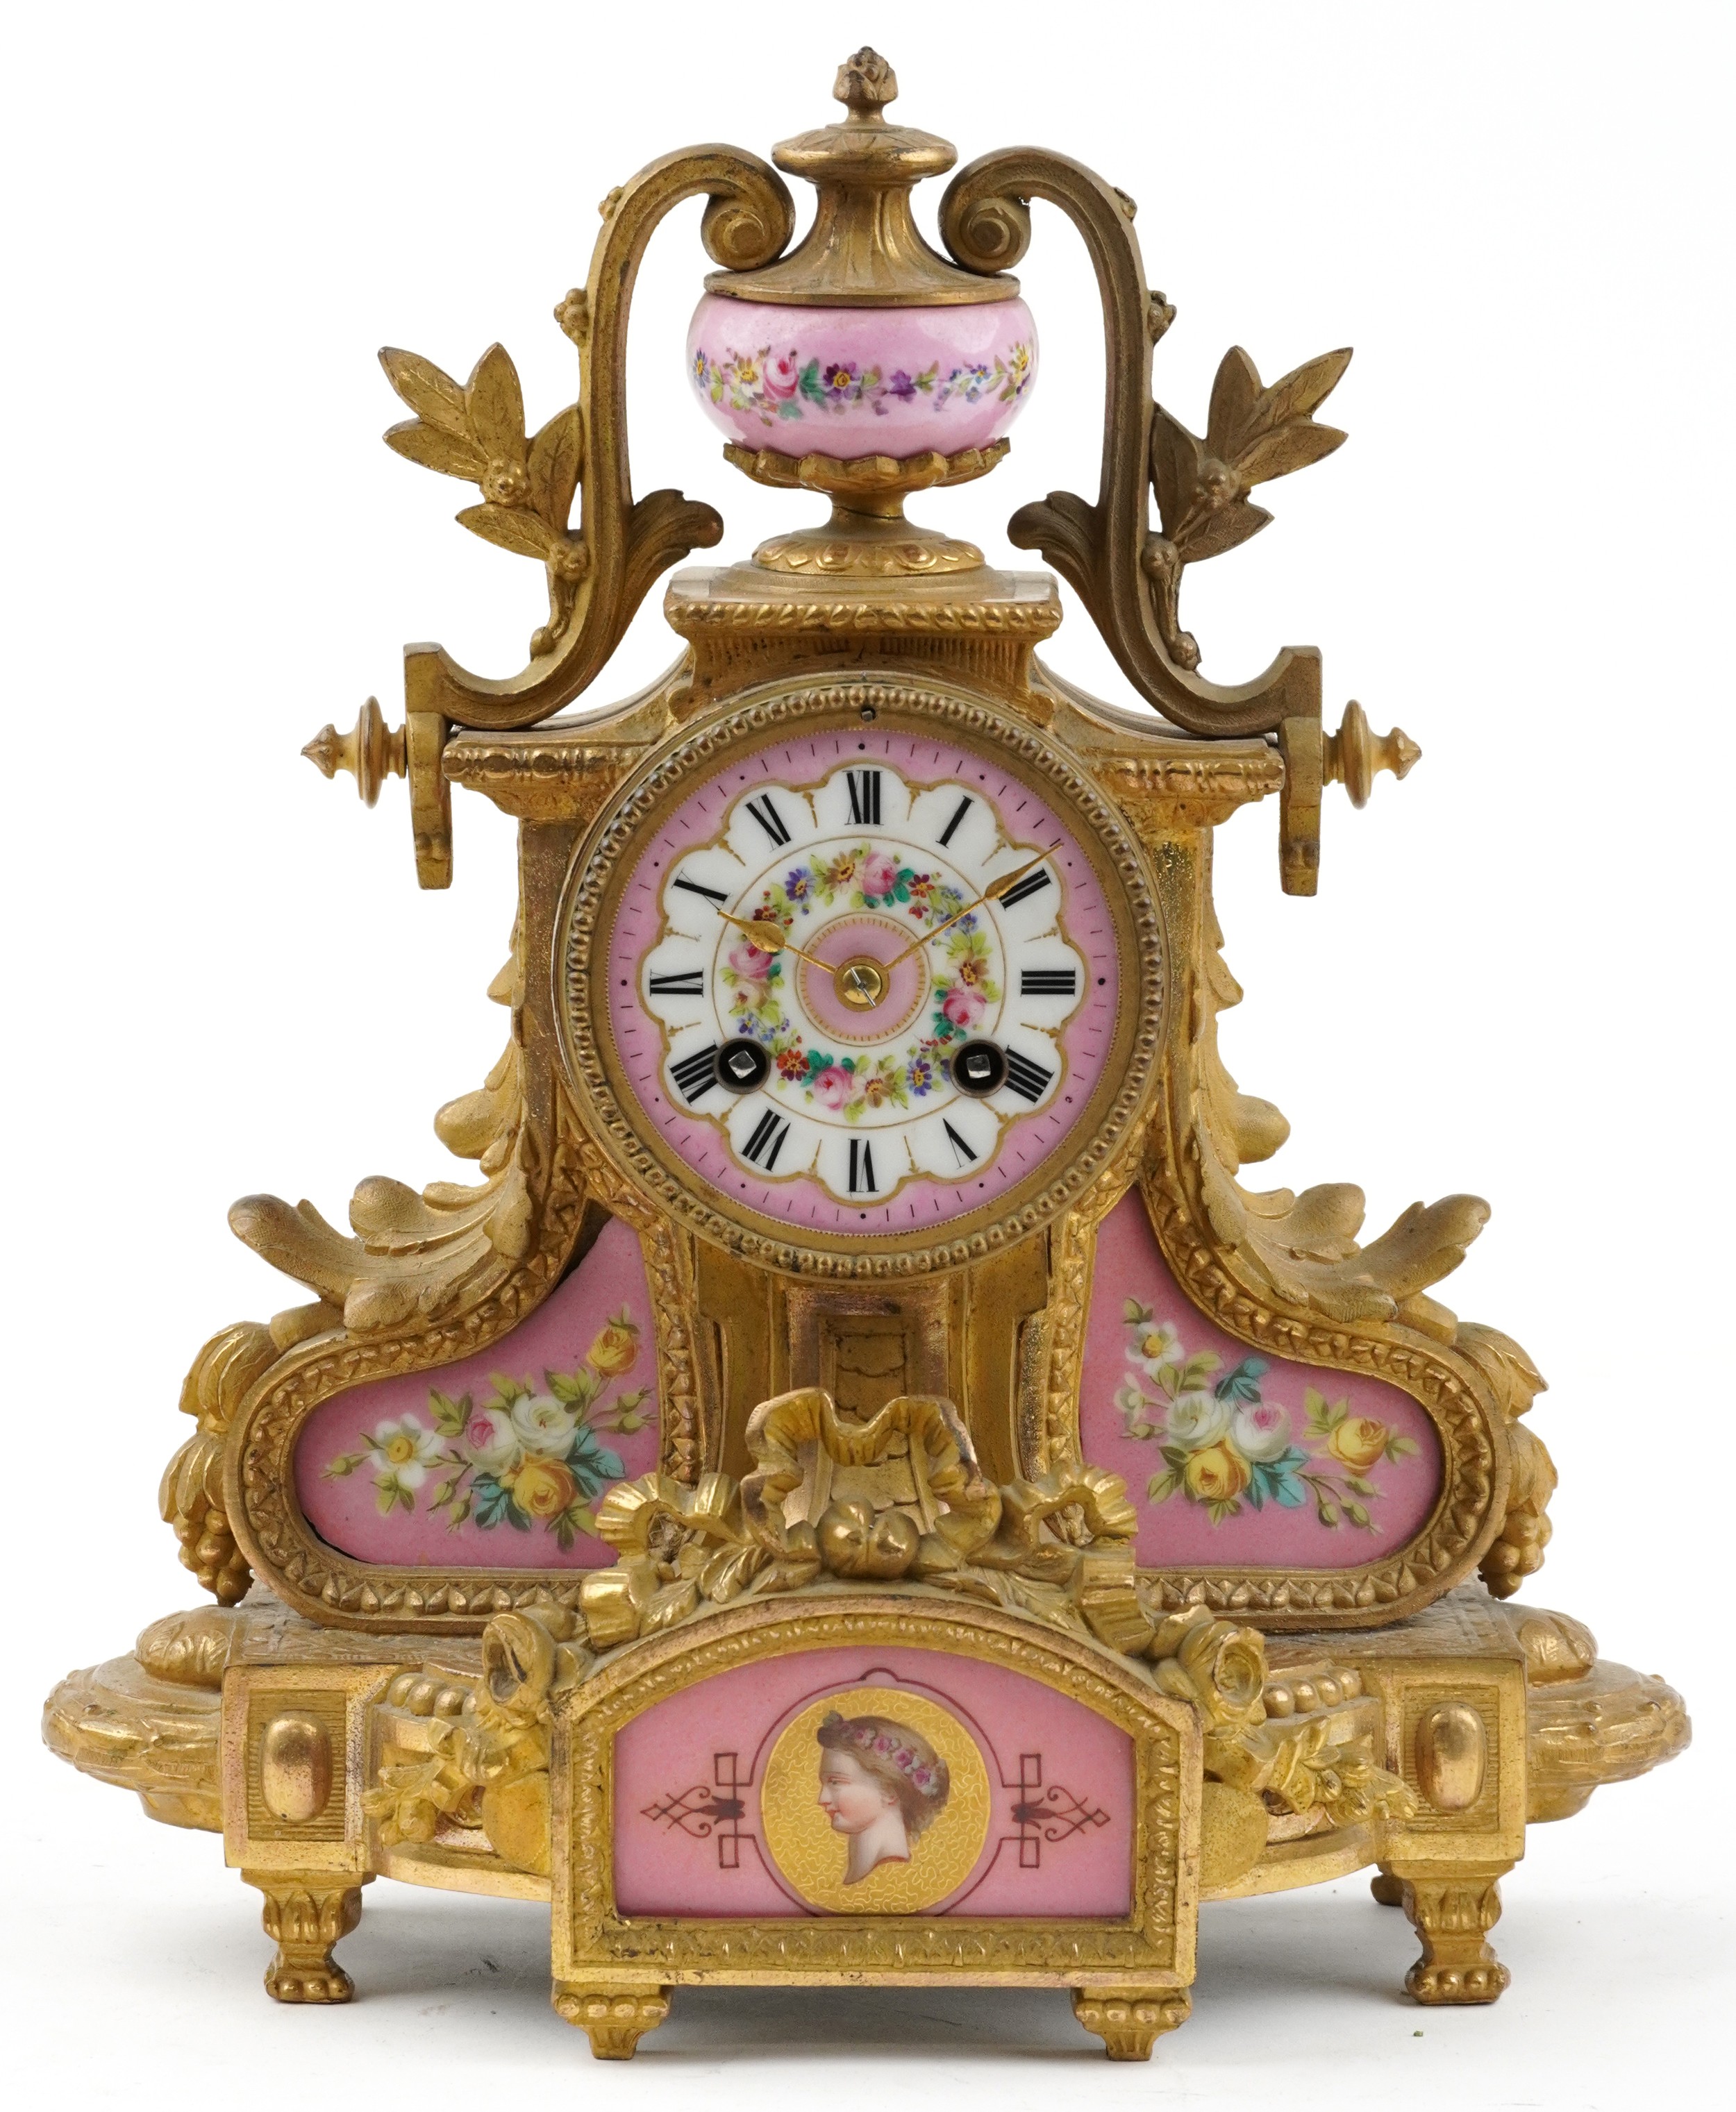 19th century French ormolu mantle clock striking on a bell having urn finial and Sevres type